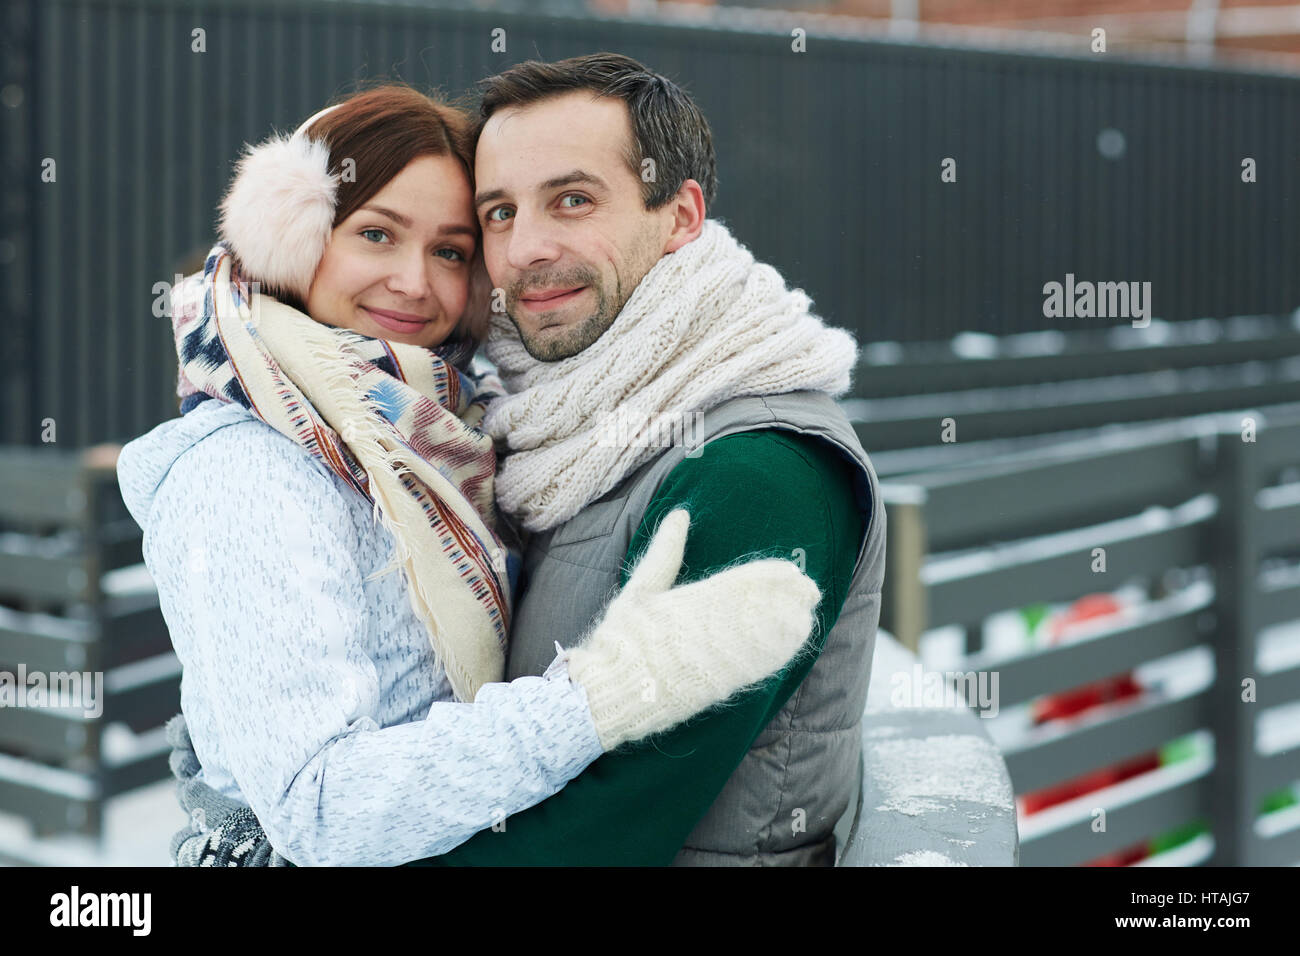 Affectionate man and woman in embrace looking at camera Stock Photo